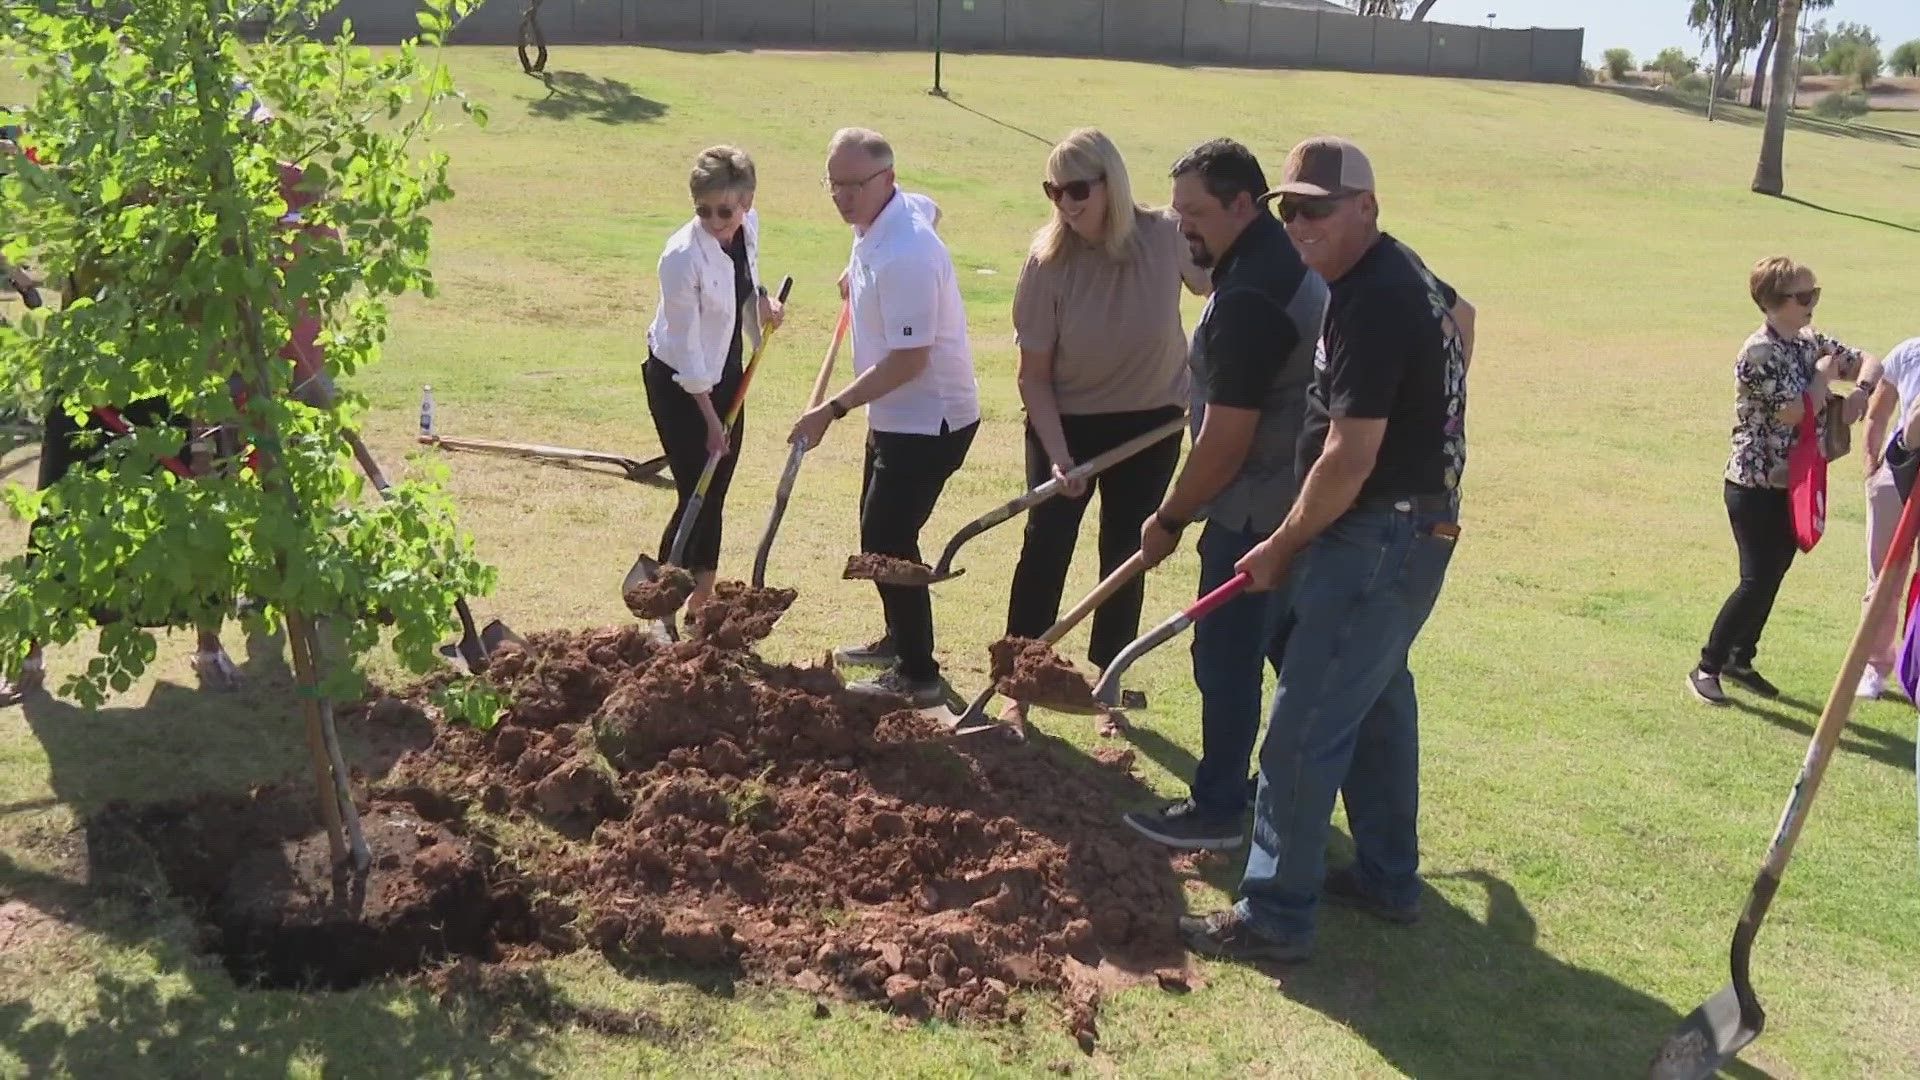 The city hopes to plant a million trees by 2050 as part of the 'Trees are Cool' initiative.